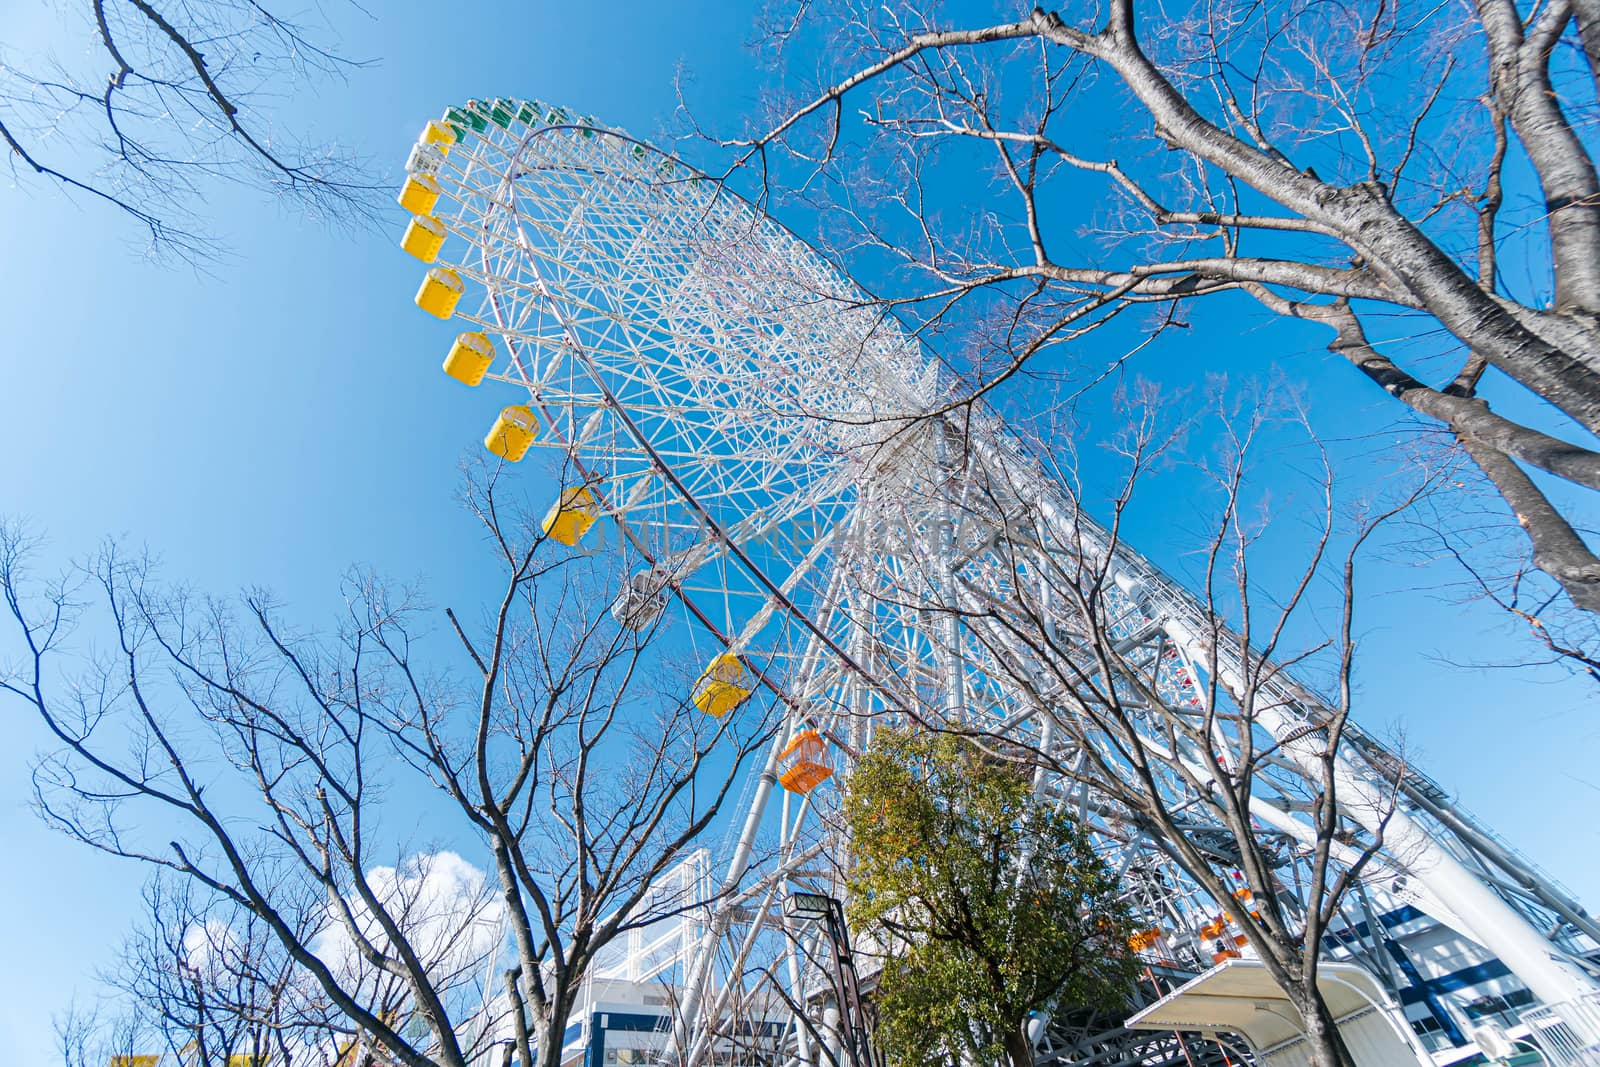 Tempozan giant ferris wheel in Osaka, Japan with  bright blue sk by Songpracone